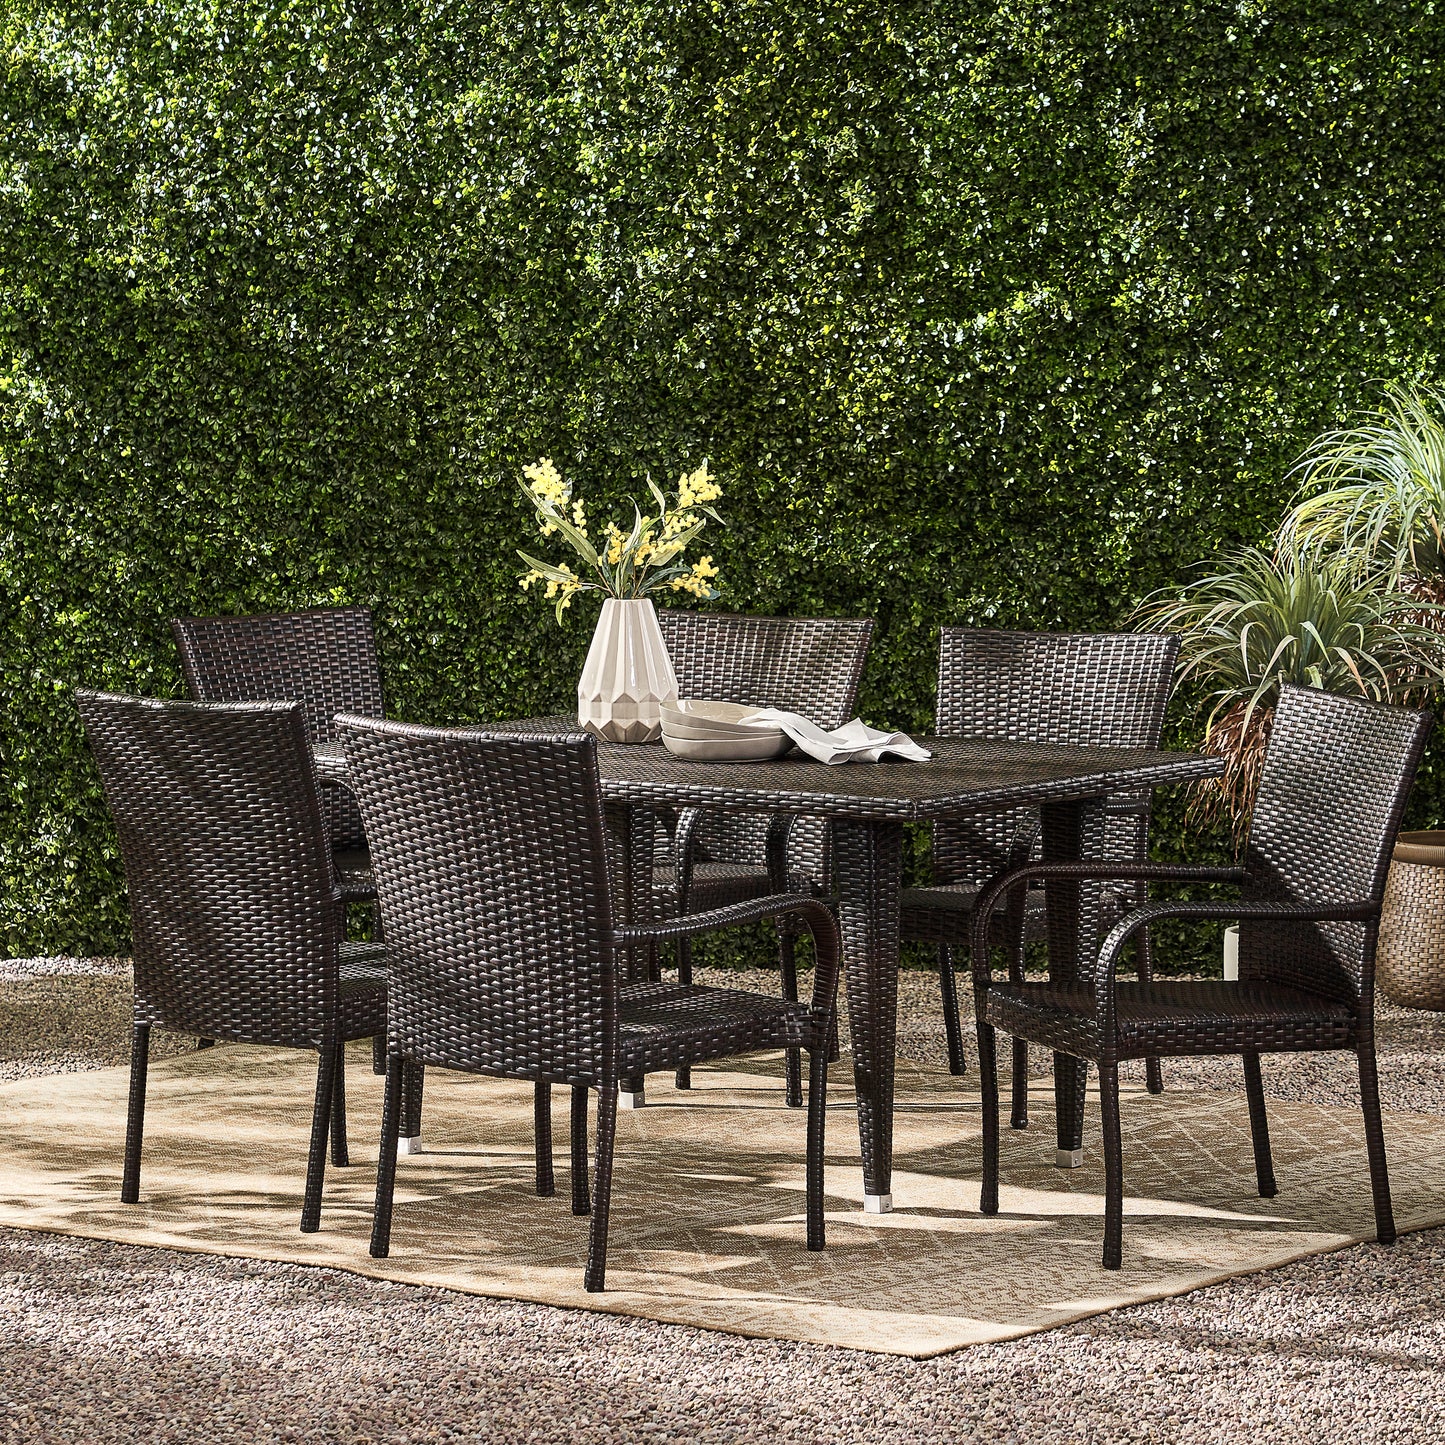 Yomunt Outdoor 7-Piece Multi-Brown Wicker Dining Set with Stackable Chairs